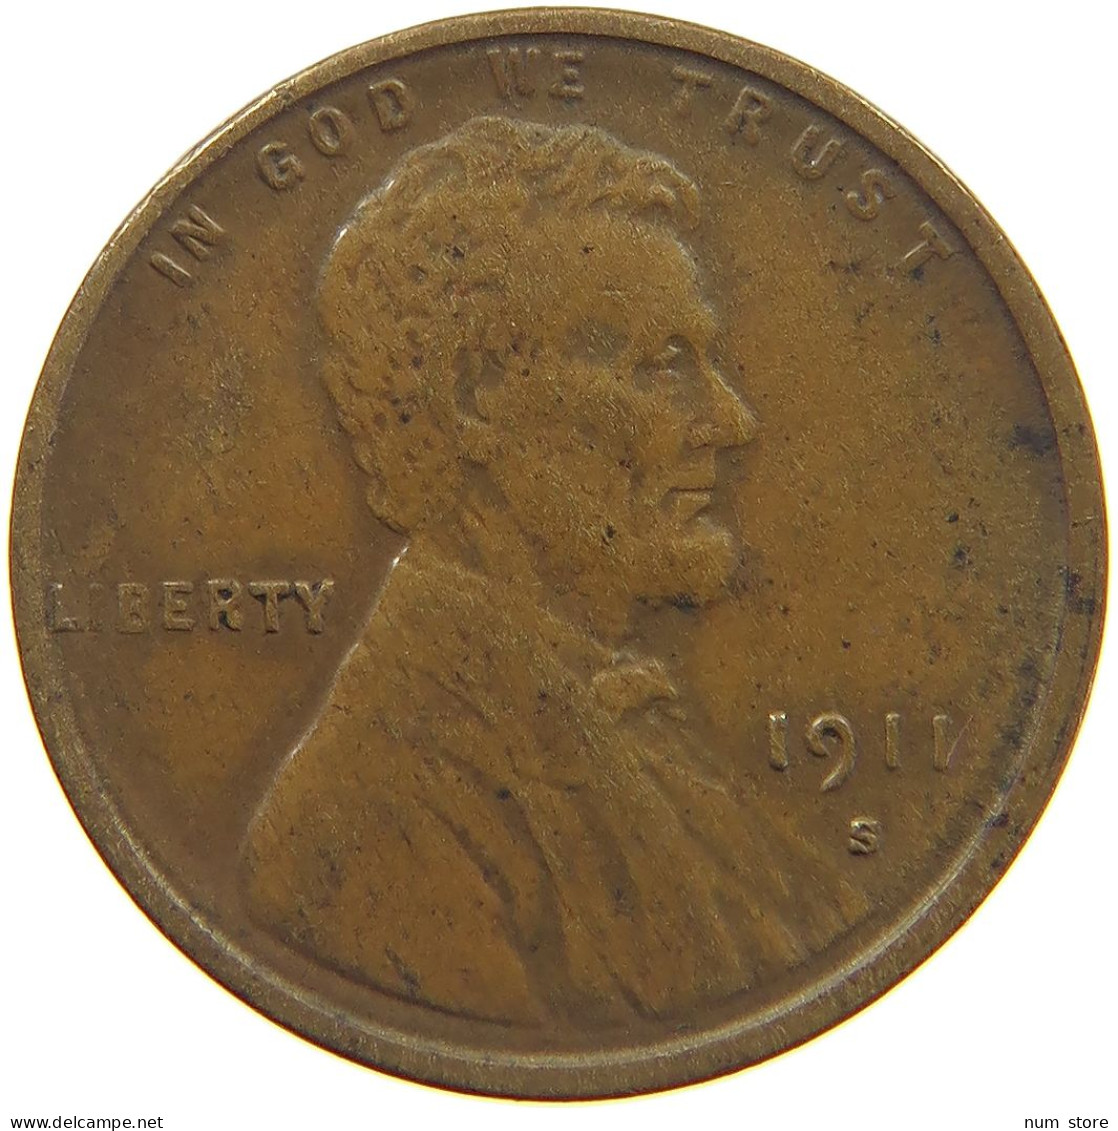 UNITED STATES OF AMERICA CENT 1911 S Lincoln Wheat #t001 0177 - 1909-1958: Lincoln, Wheat Ears Reverse